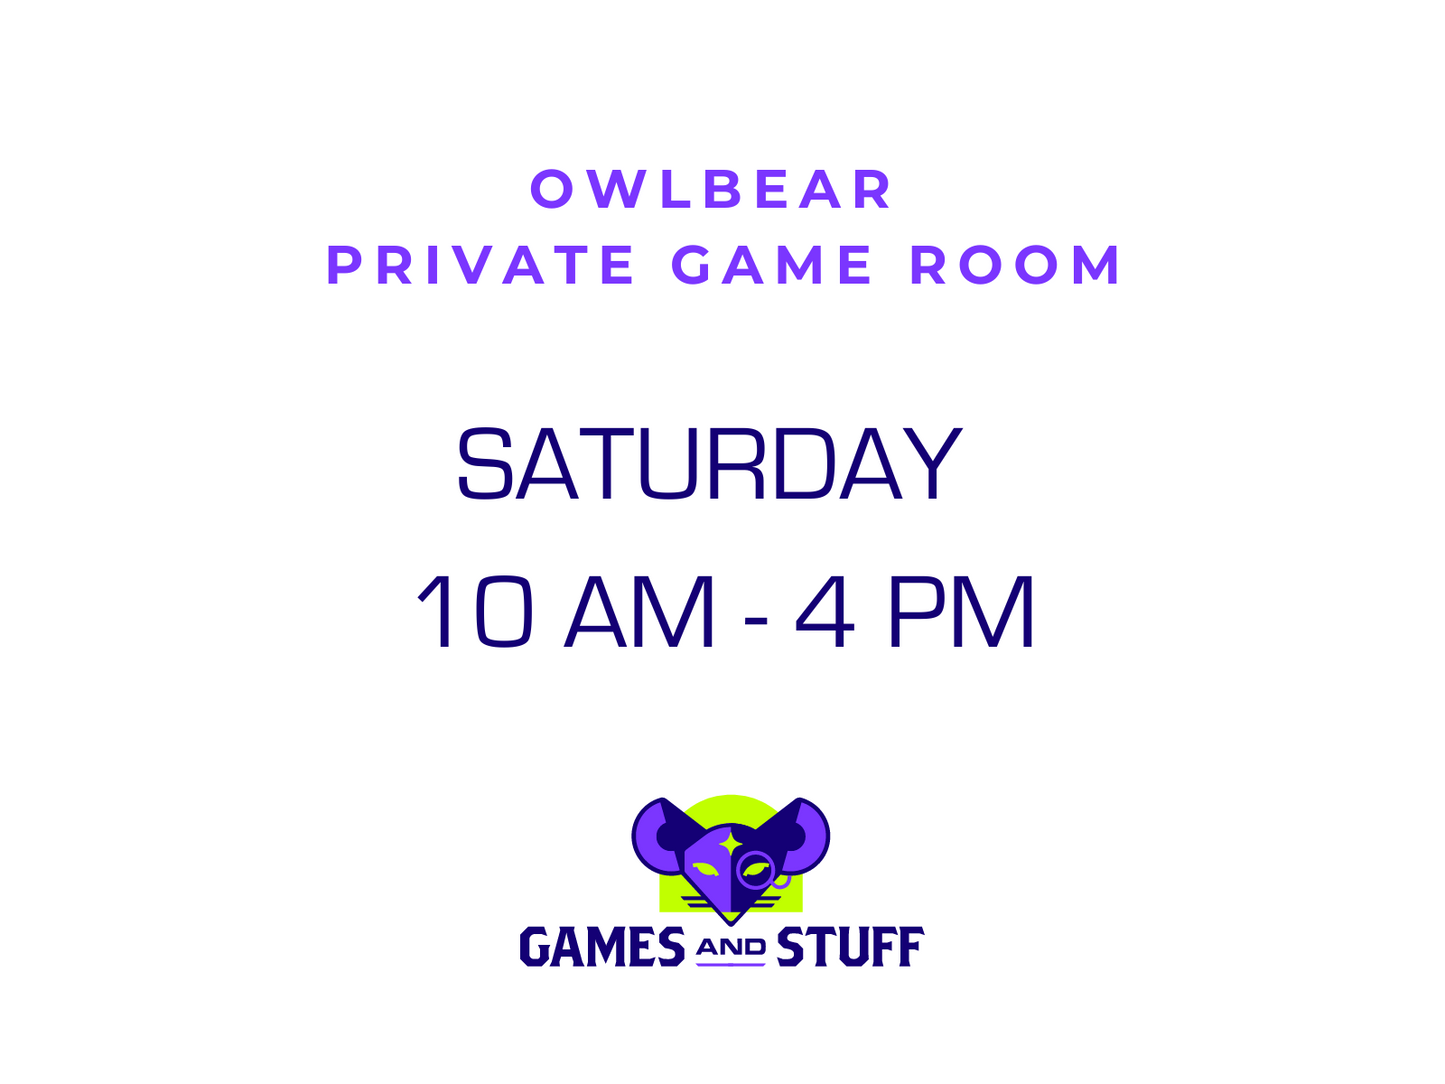 OWLBEAR PRIVATE GAME ROOM - SATURDAY DAY